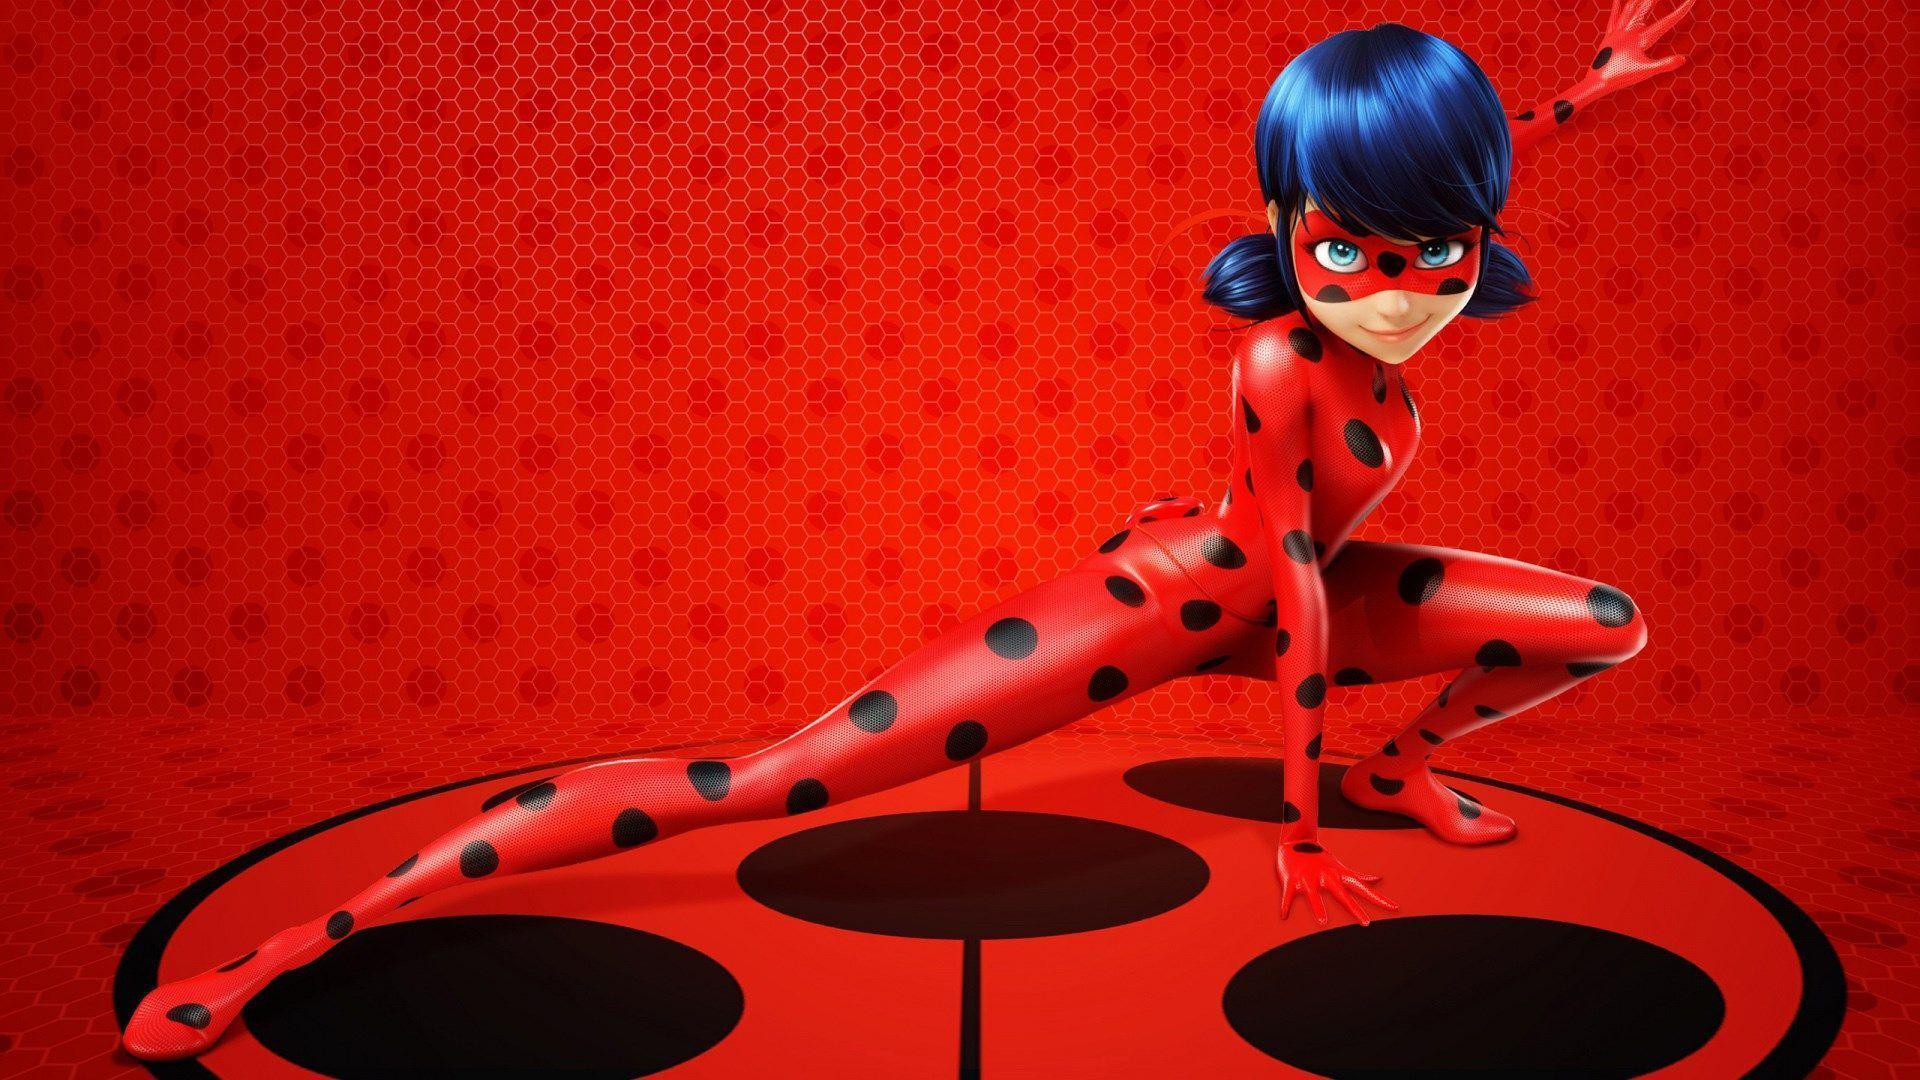 Miraculous tales of ladybug and cat noir wallpapers and backgrounds